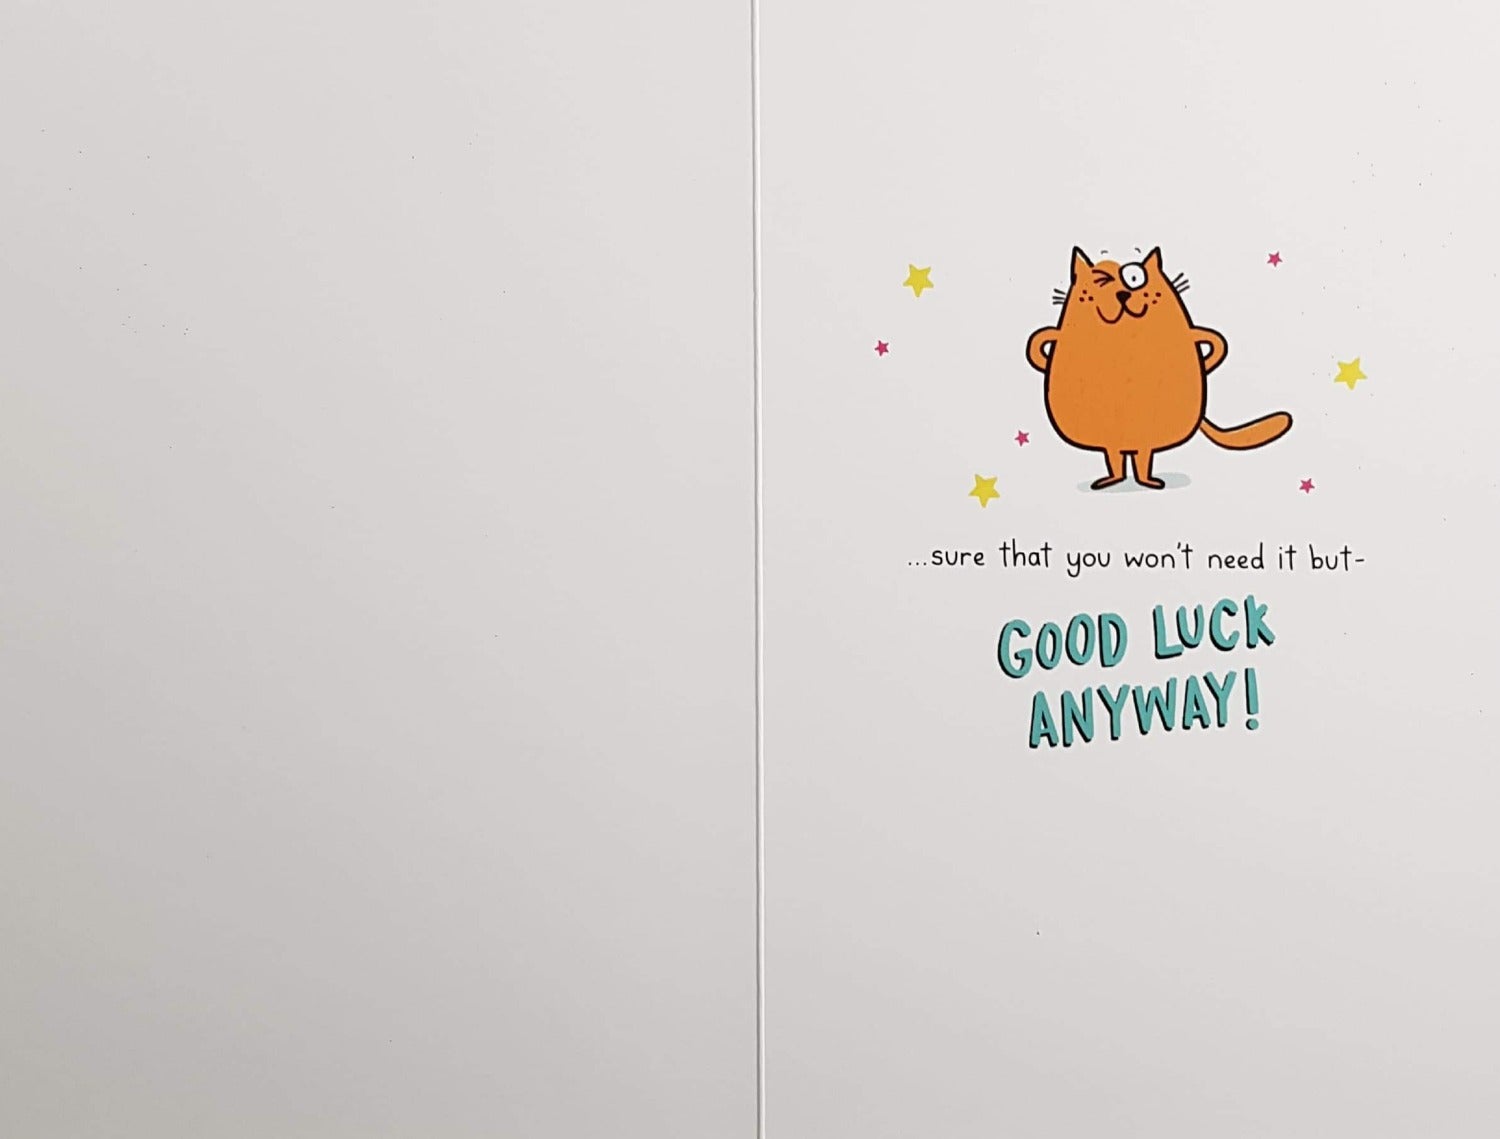 Good Luck Card - Exam / The Hard Work Is Behind You...